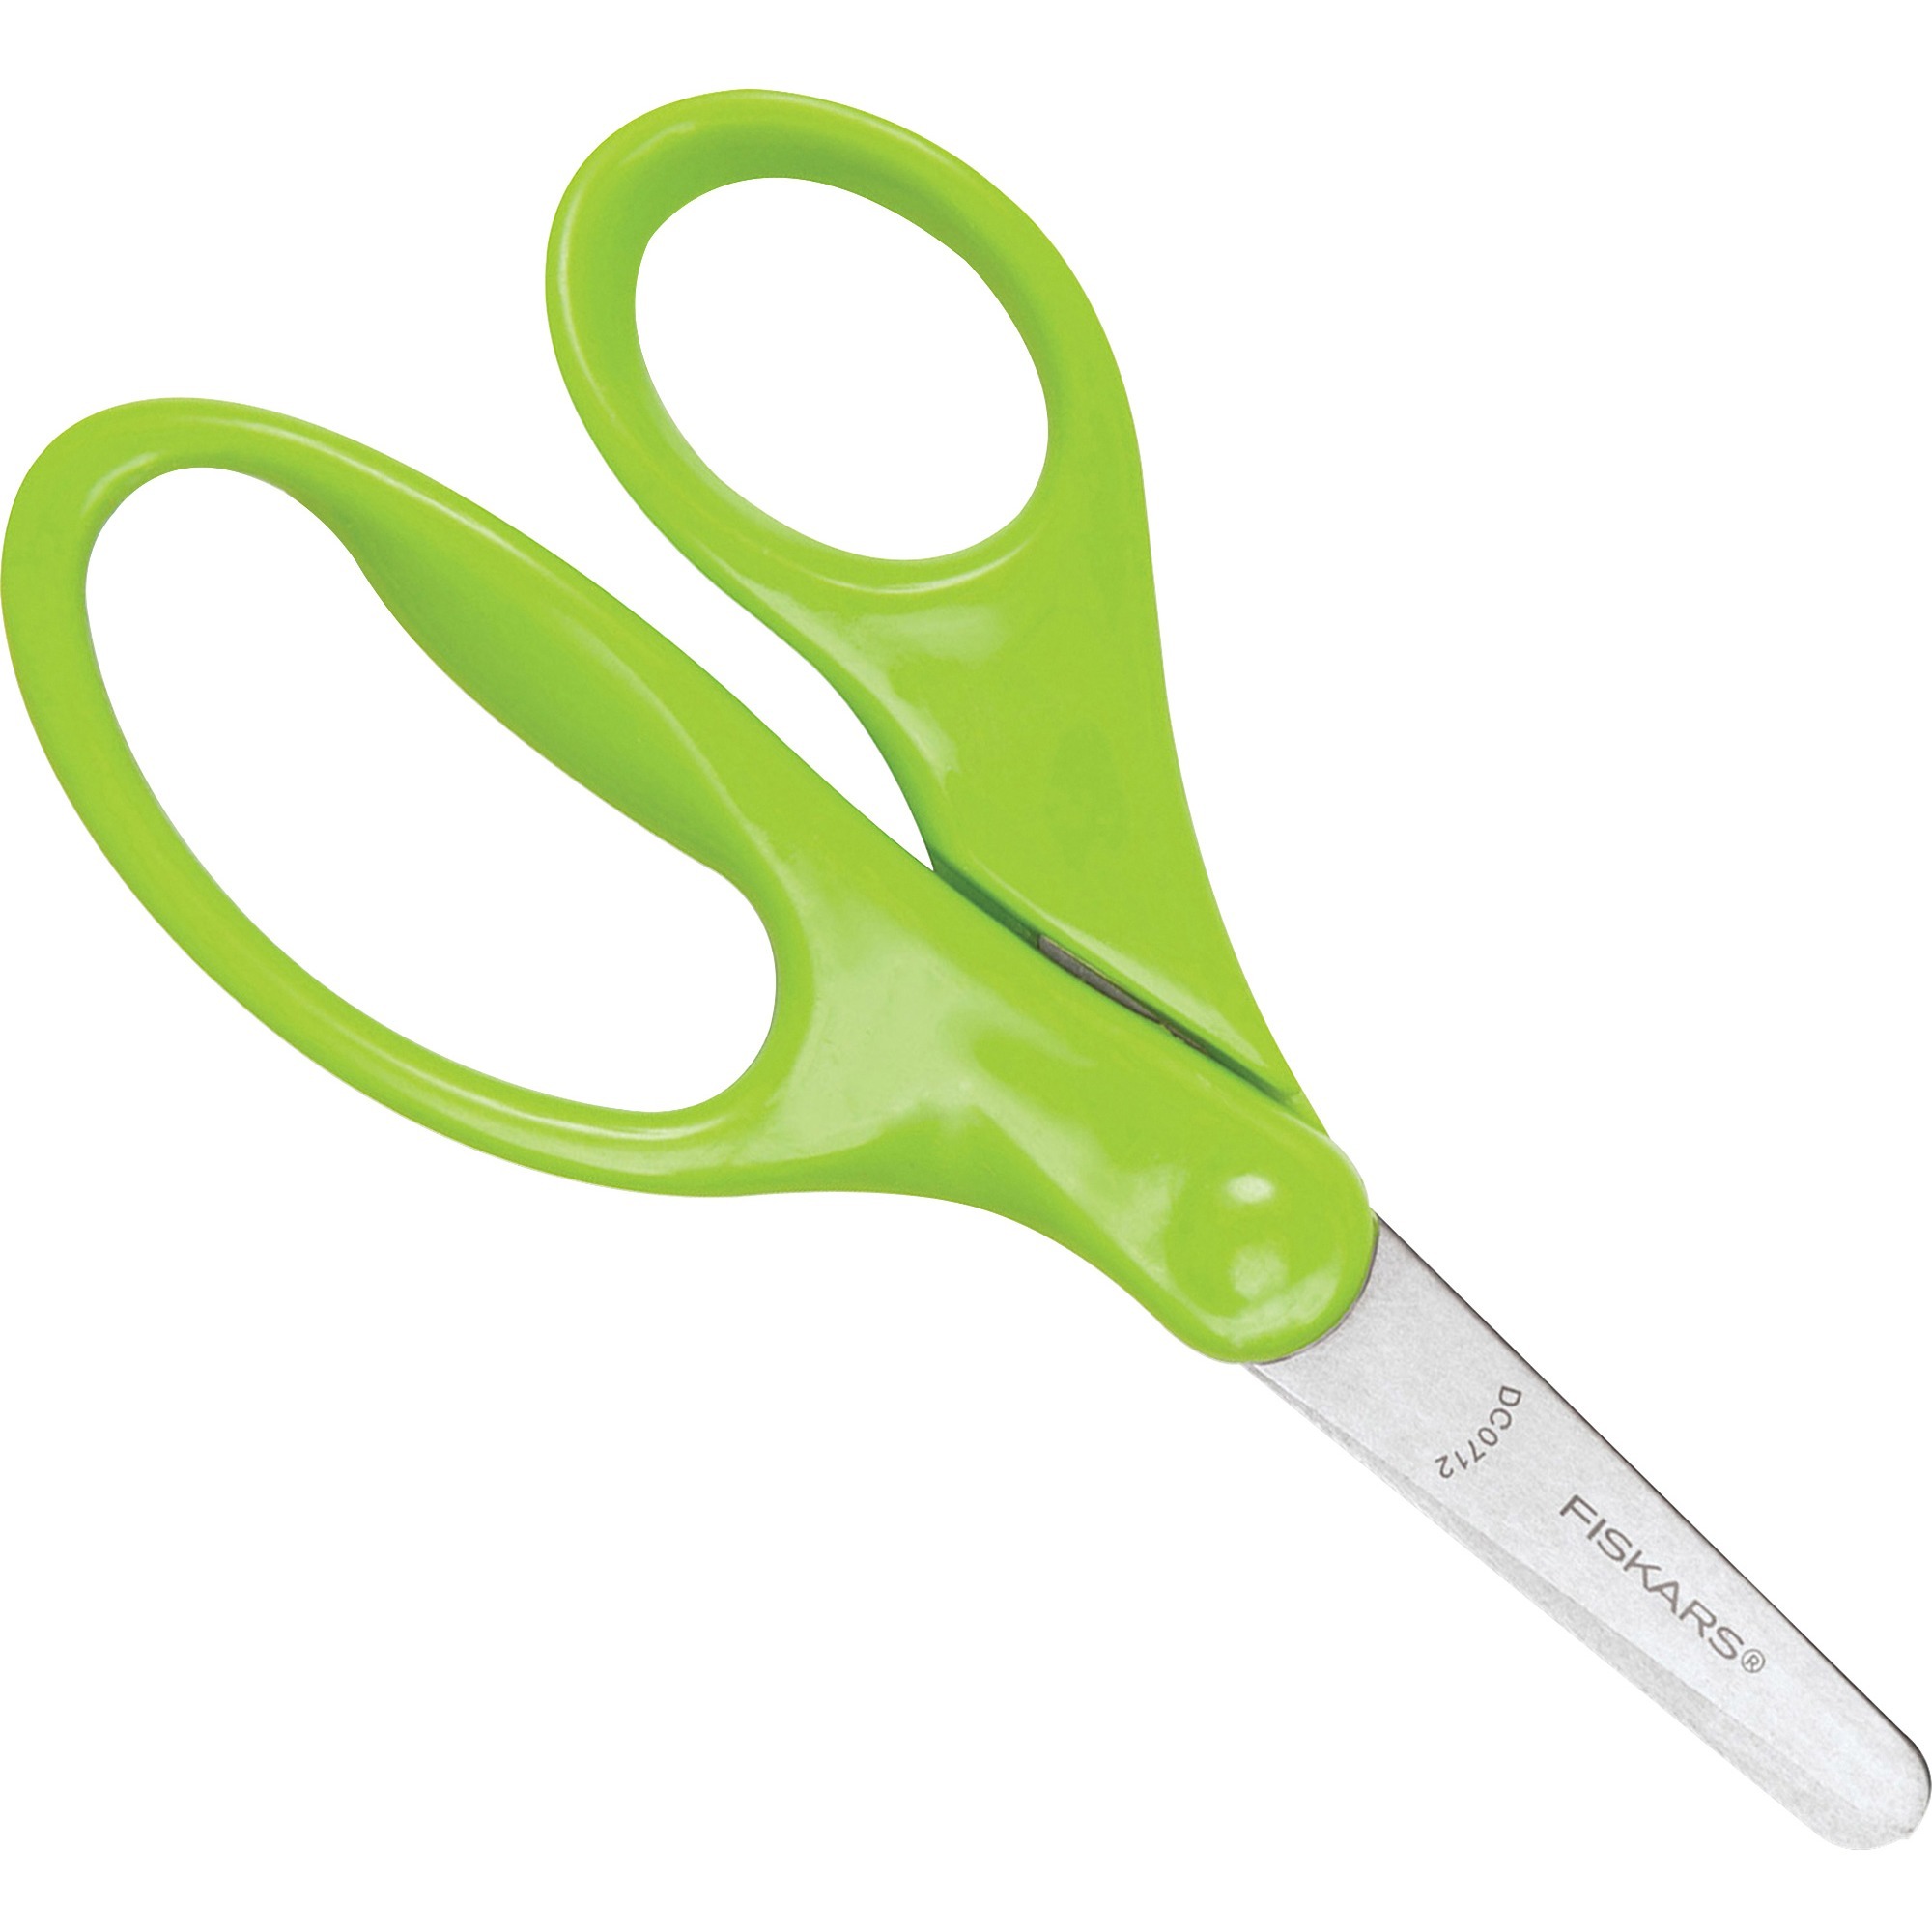 Maped Koopy Spring-Assisted Educational Scissors 5 / 13cm